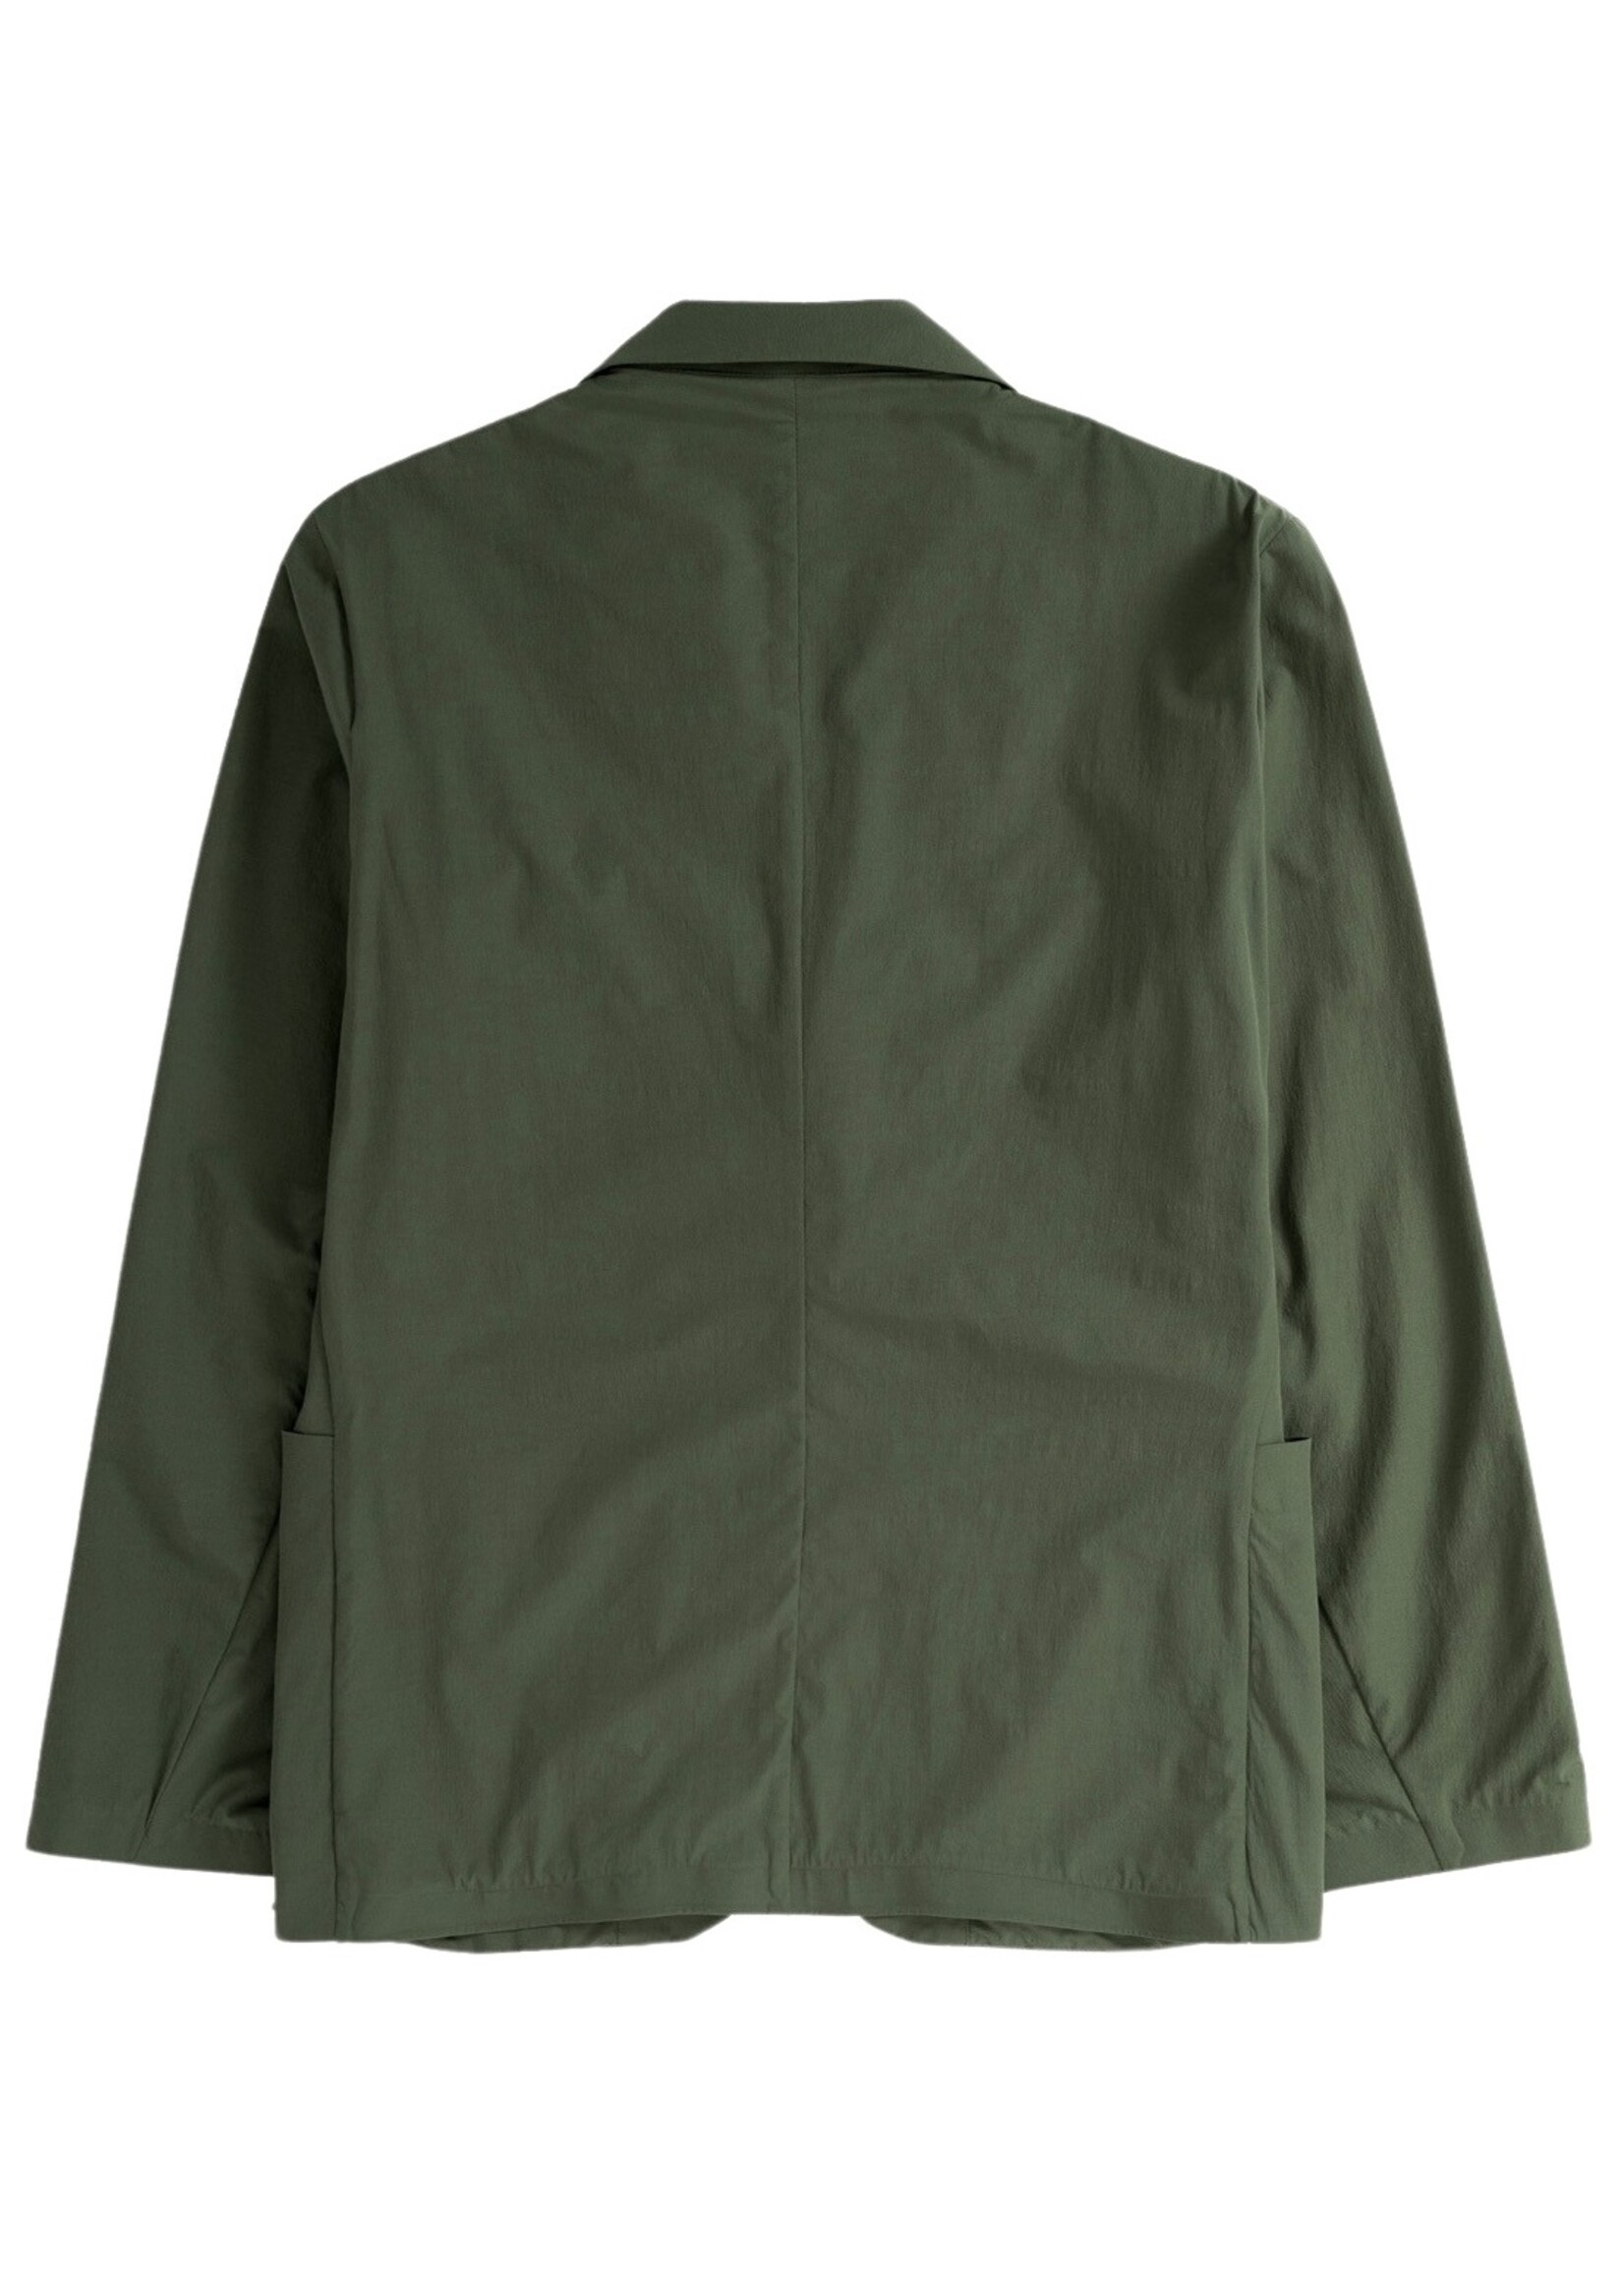 NORSE PROJECTS EMIL TRAVEL LIGHT JACKET